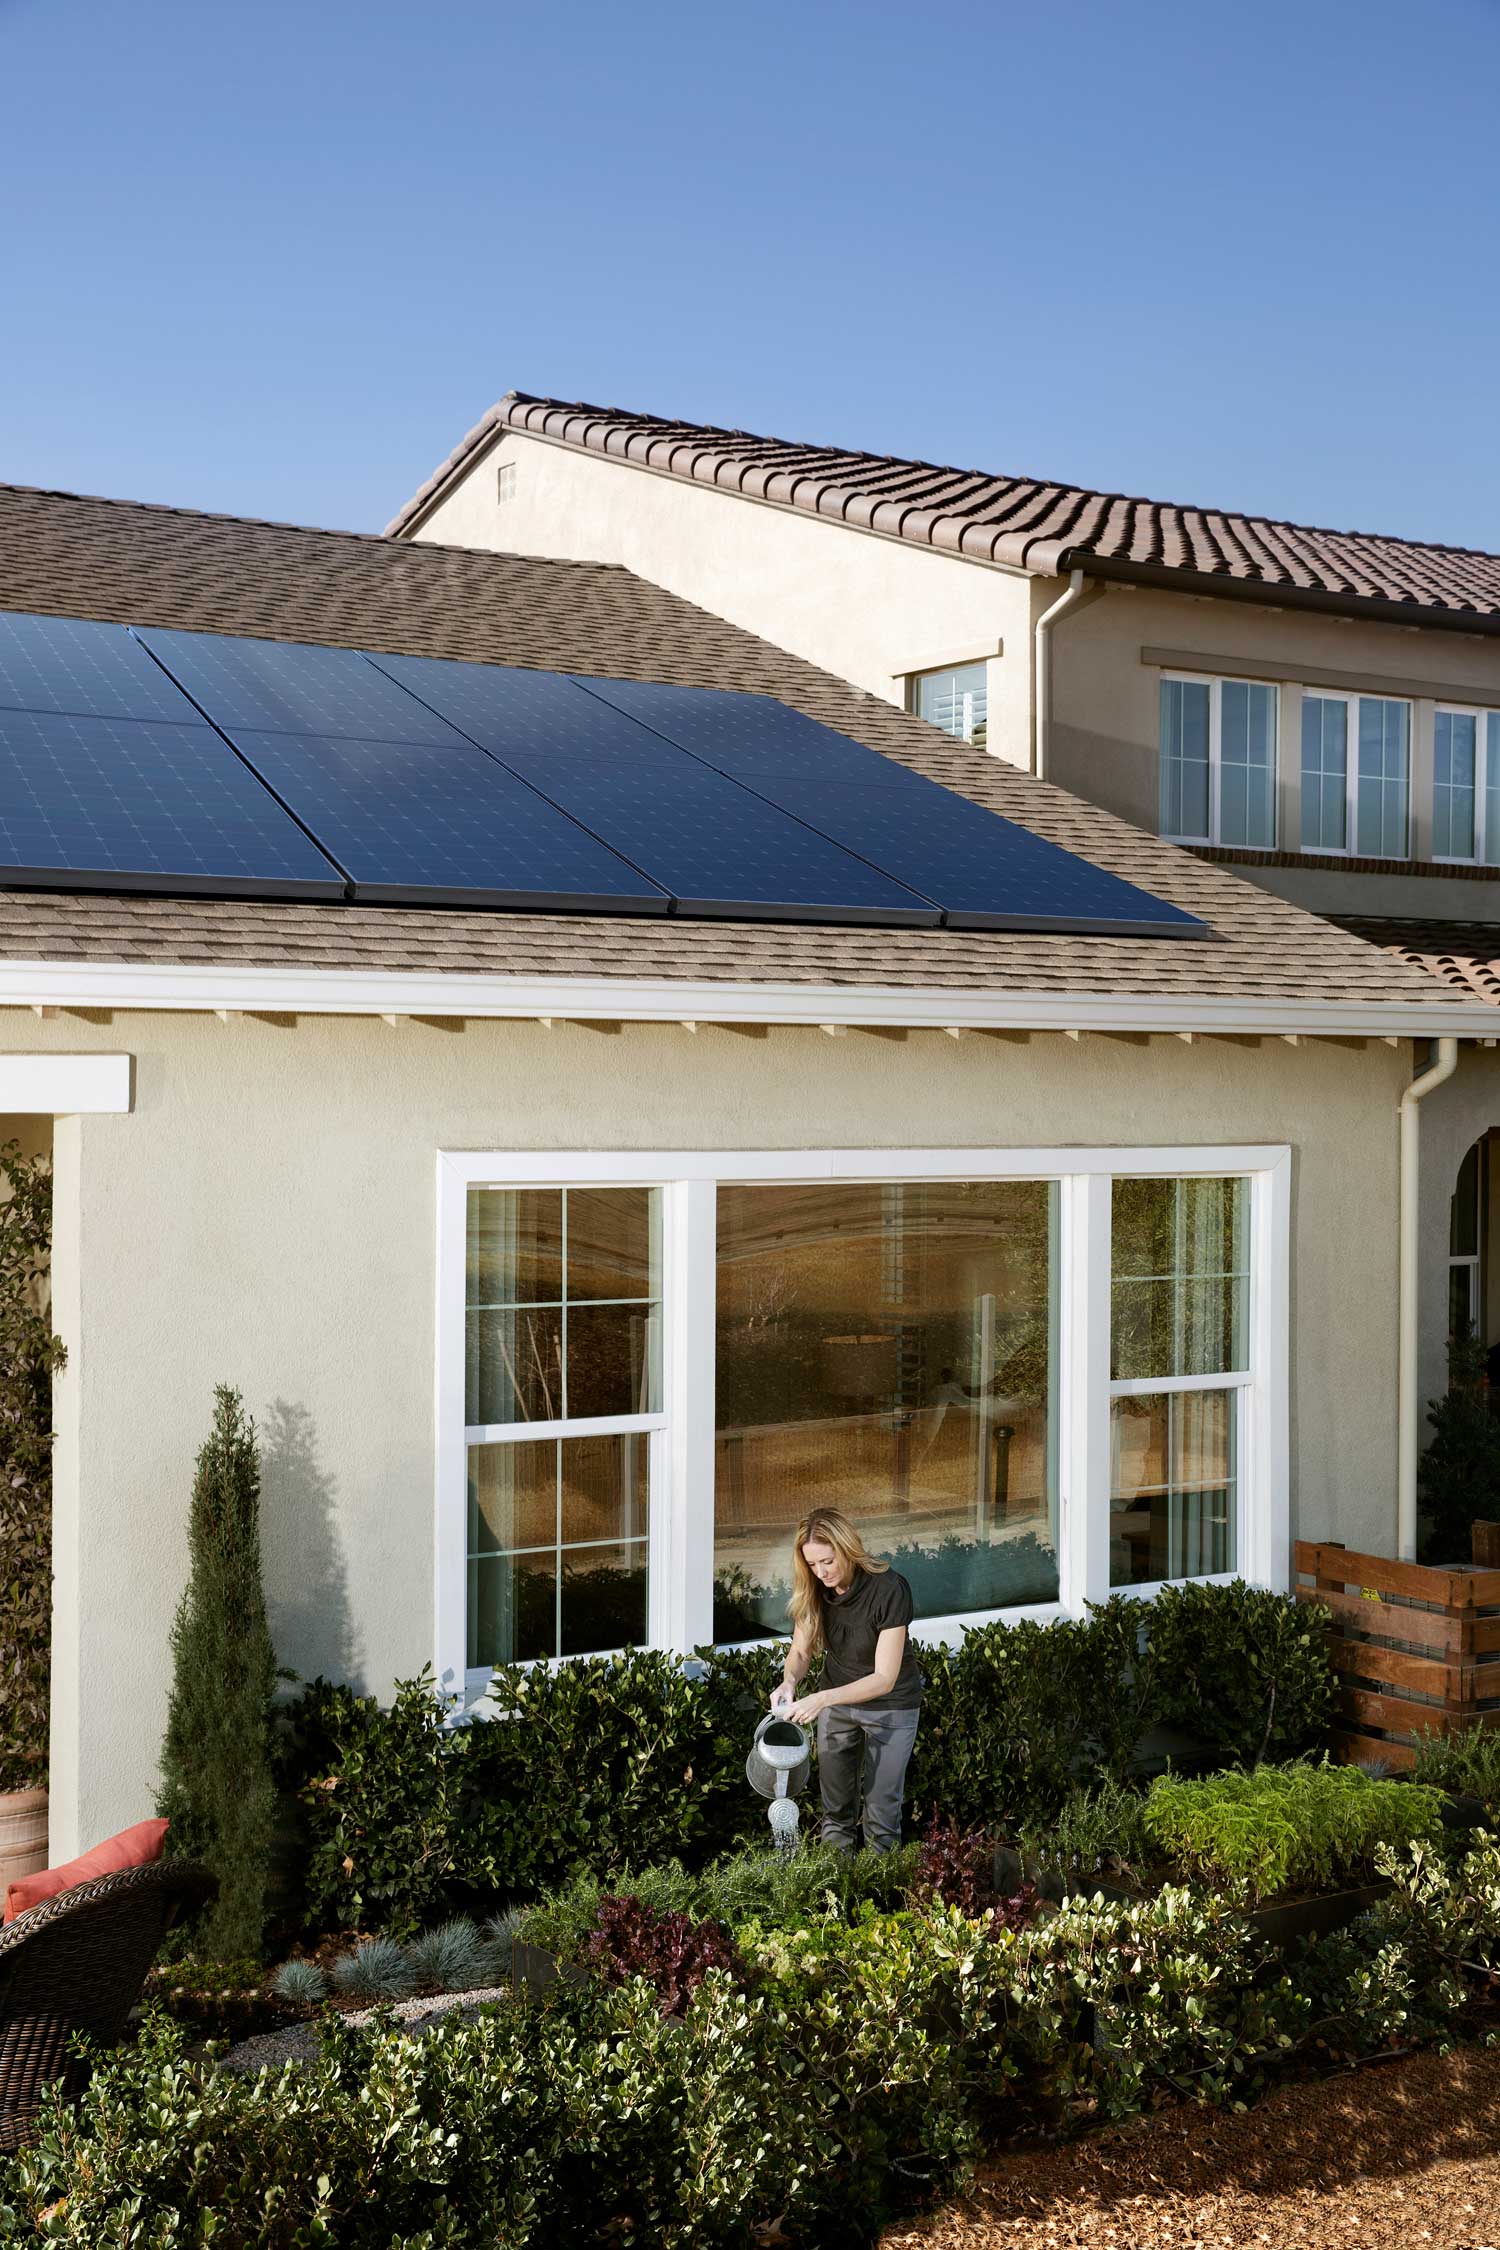 How can solar energy be used in Layton in a beautiful home like this? SunPower by Custom Energy shares ideas.